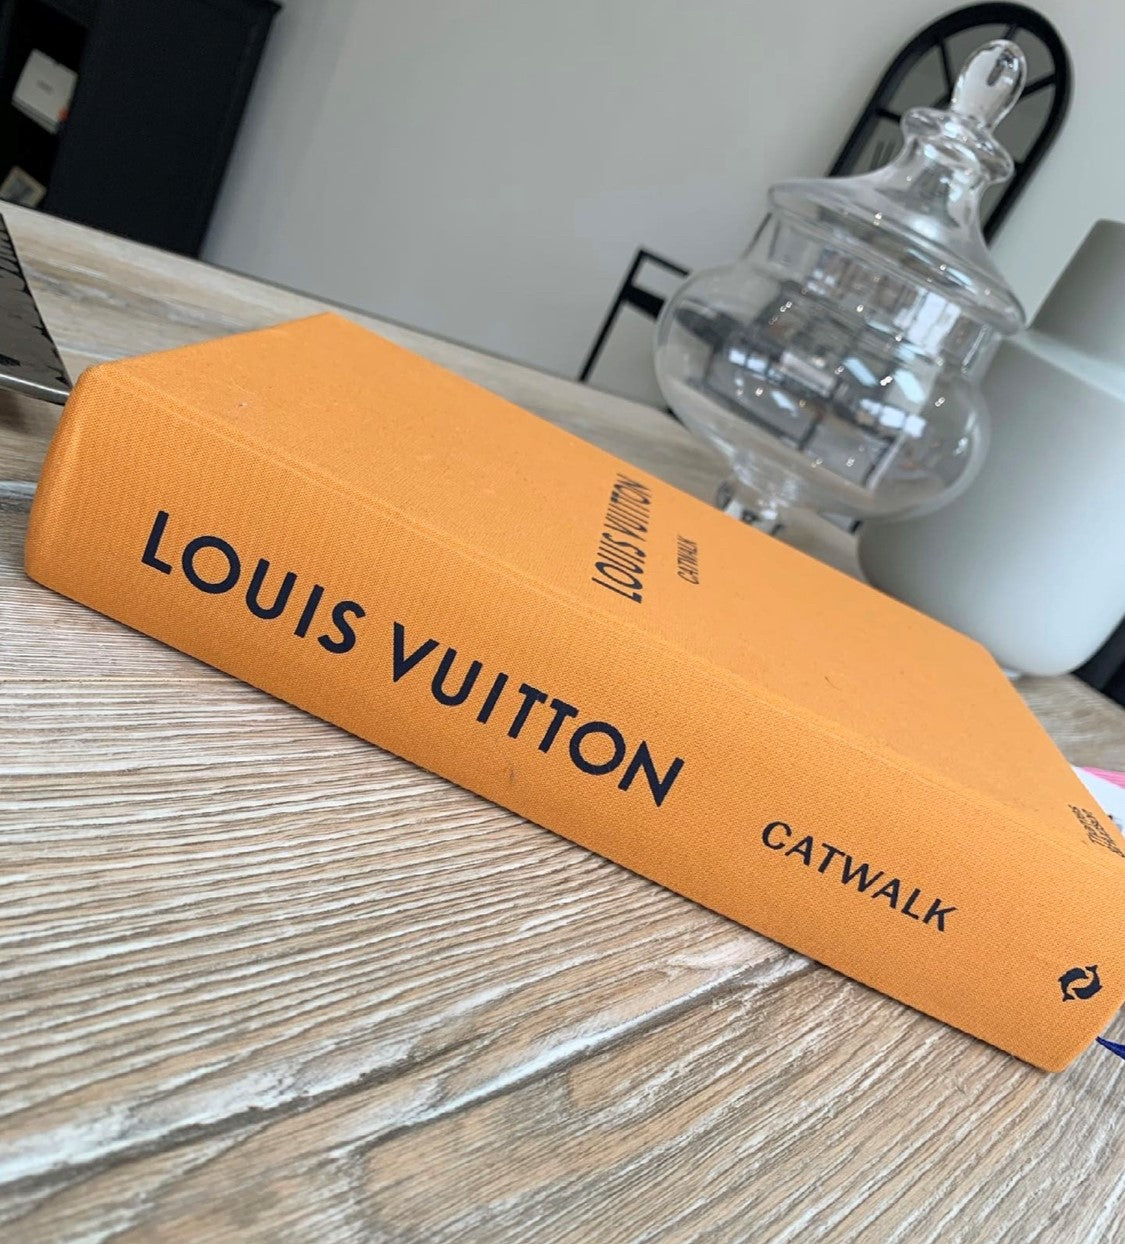 Catwalk: Louis Vuitton : The Complete Fashion Collections (Hardcover) 